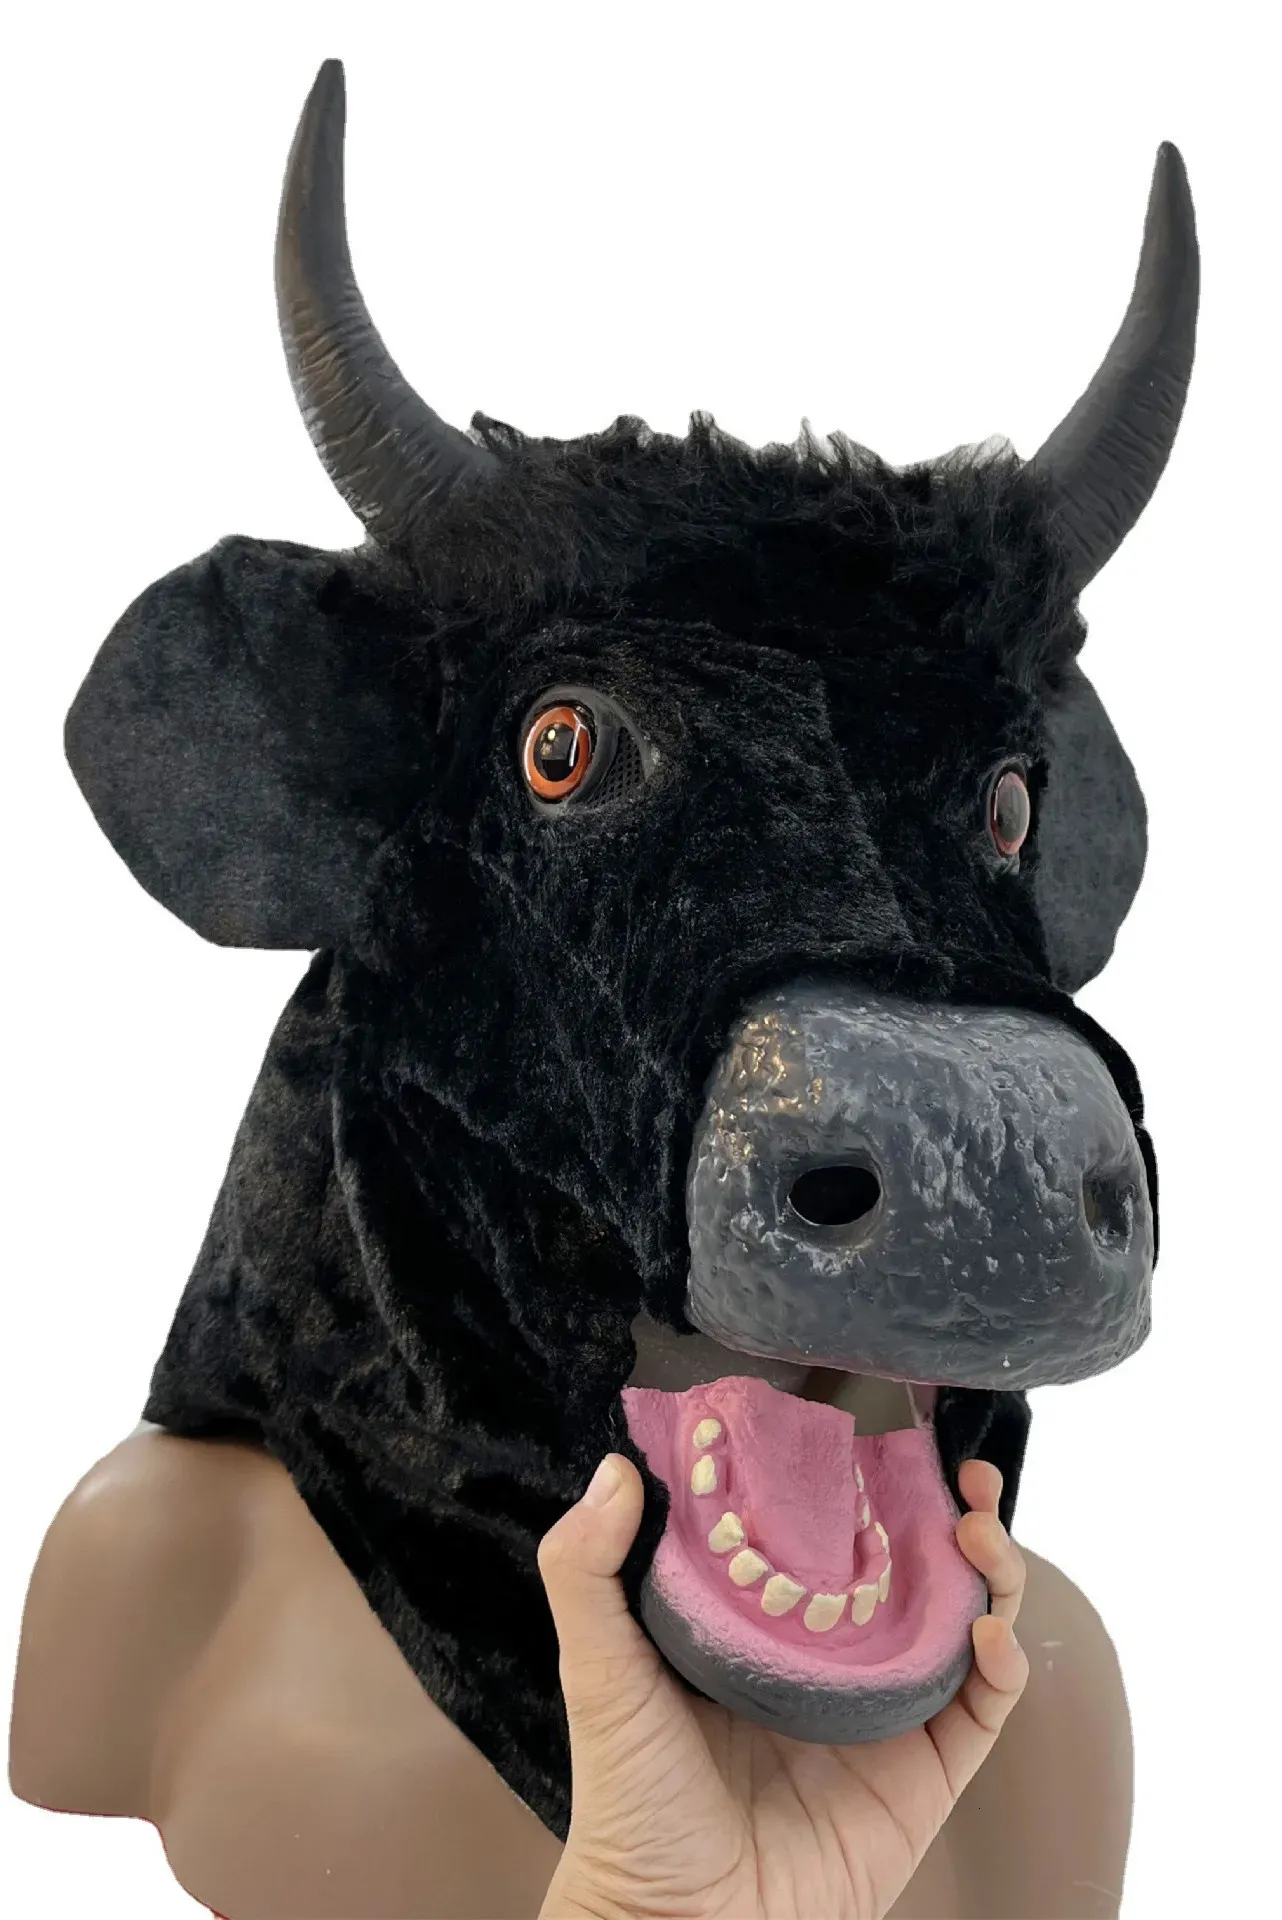 Party Masks Halloween Mask Realistic Mouth Mover Cow - Creepy Moving Bull Fursuit Animal Head Rubber Latex Masque -up Costume Party Cosplay 230927